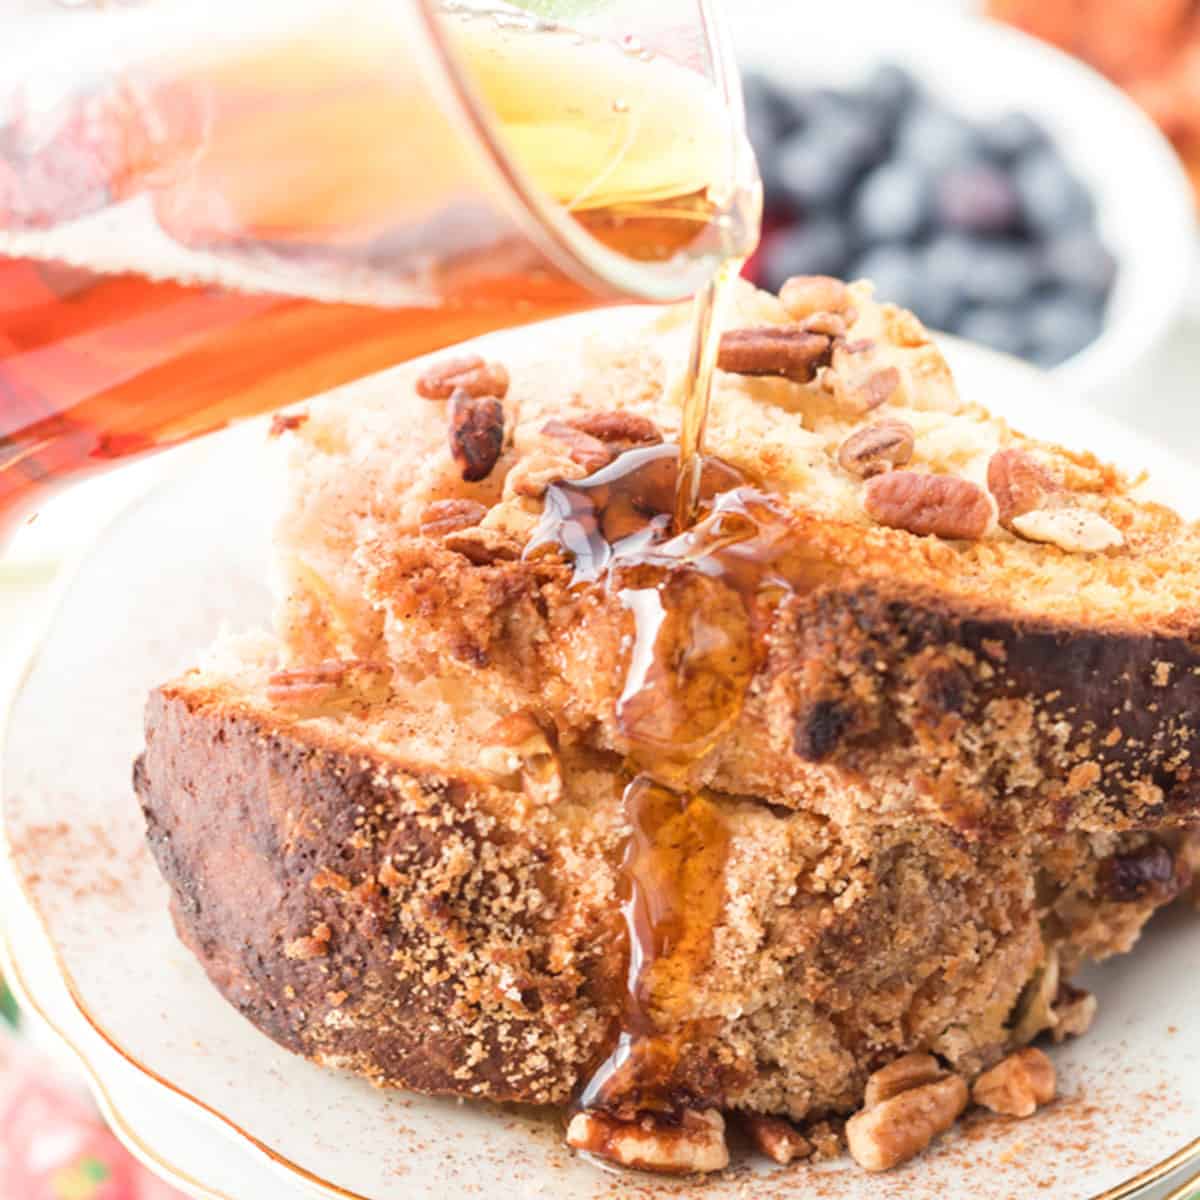 Pouring maple syrup on coffee cake.